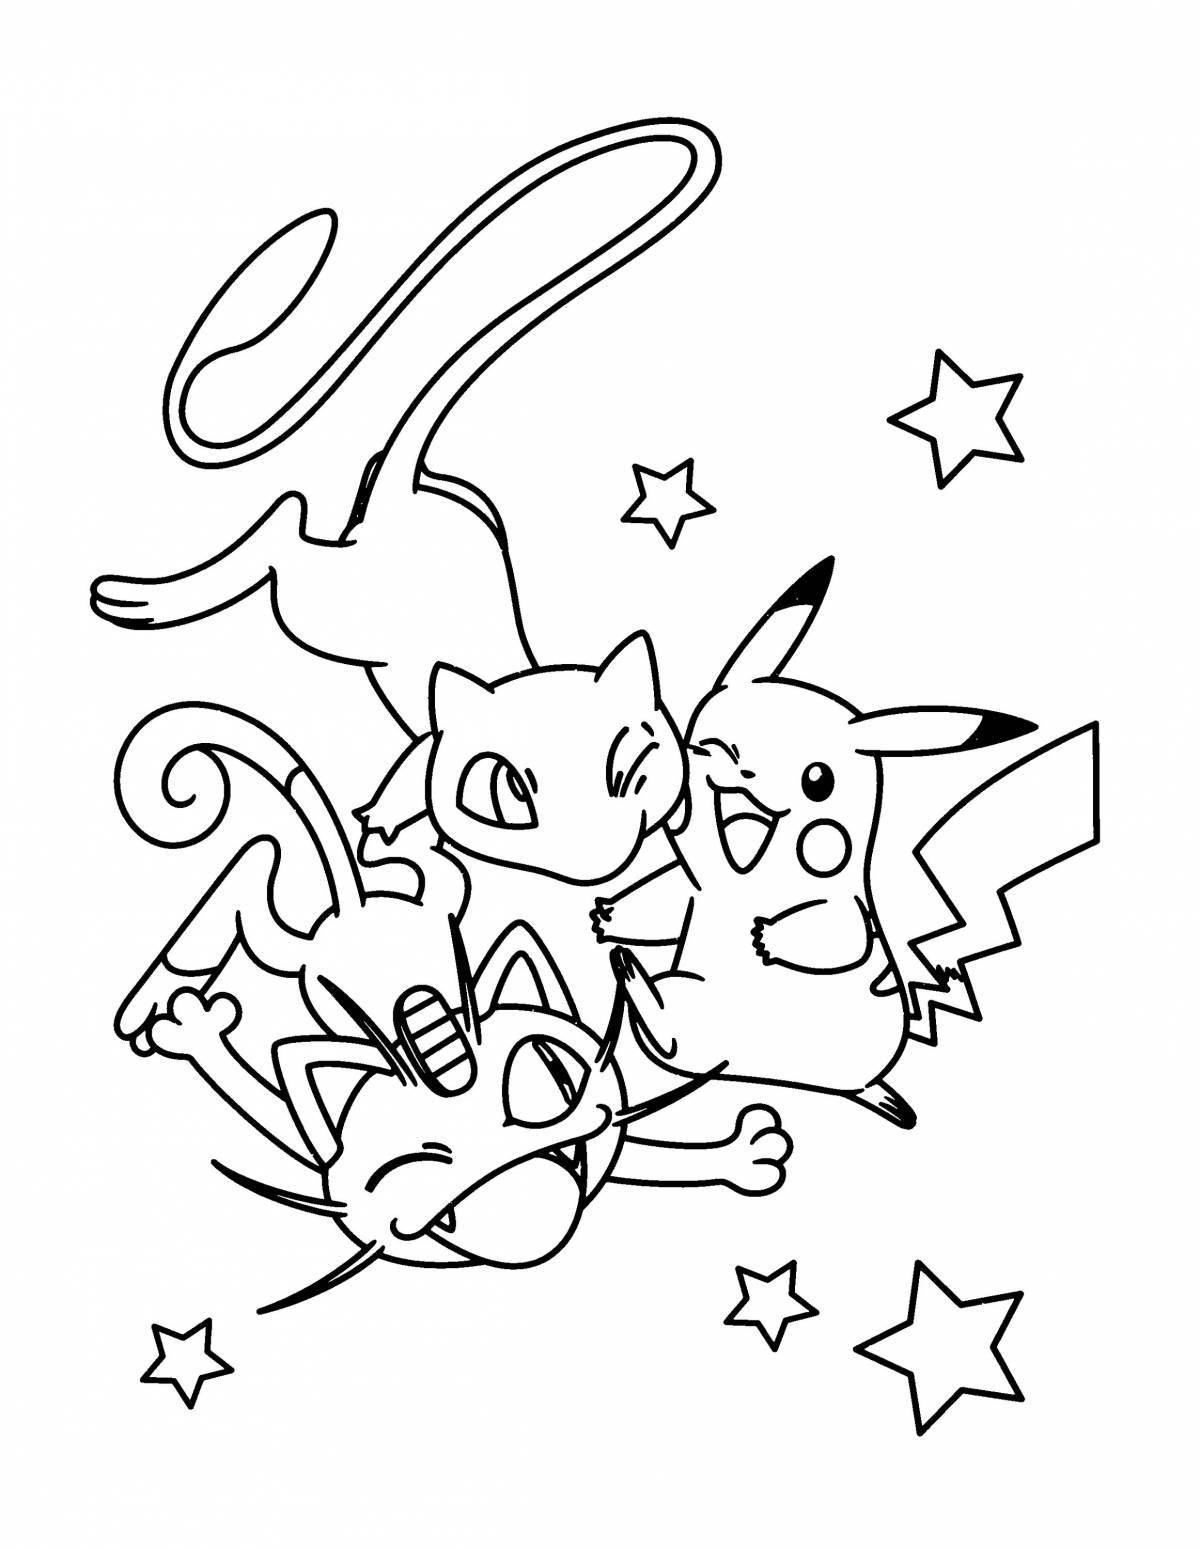 Meowth funny coloring book